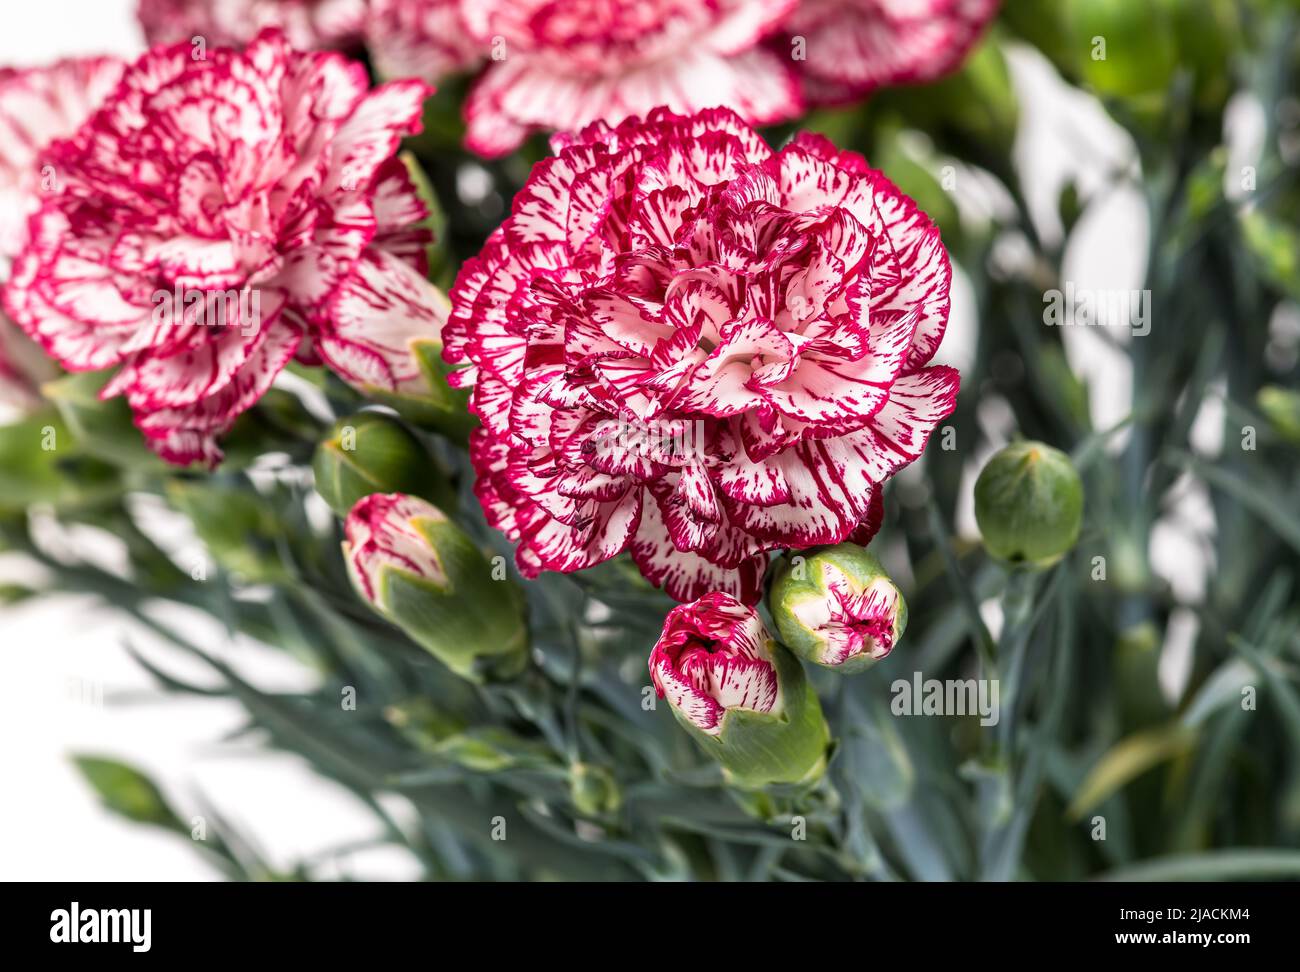 Pink and white dianthus caryophyllus flowers Stock Photo